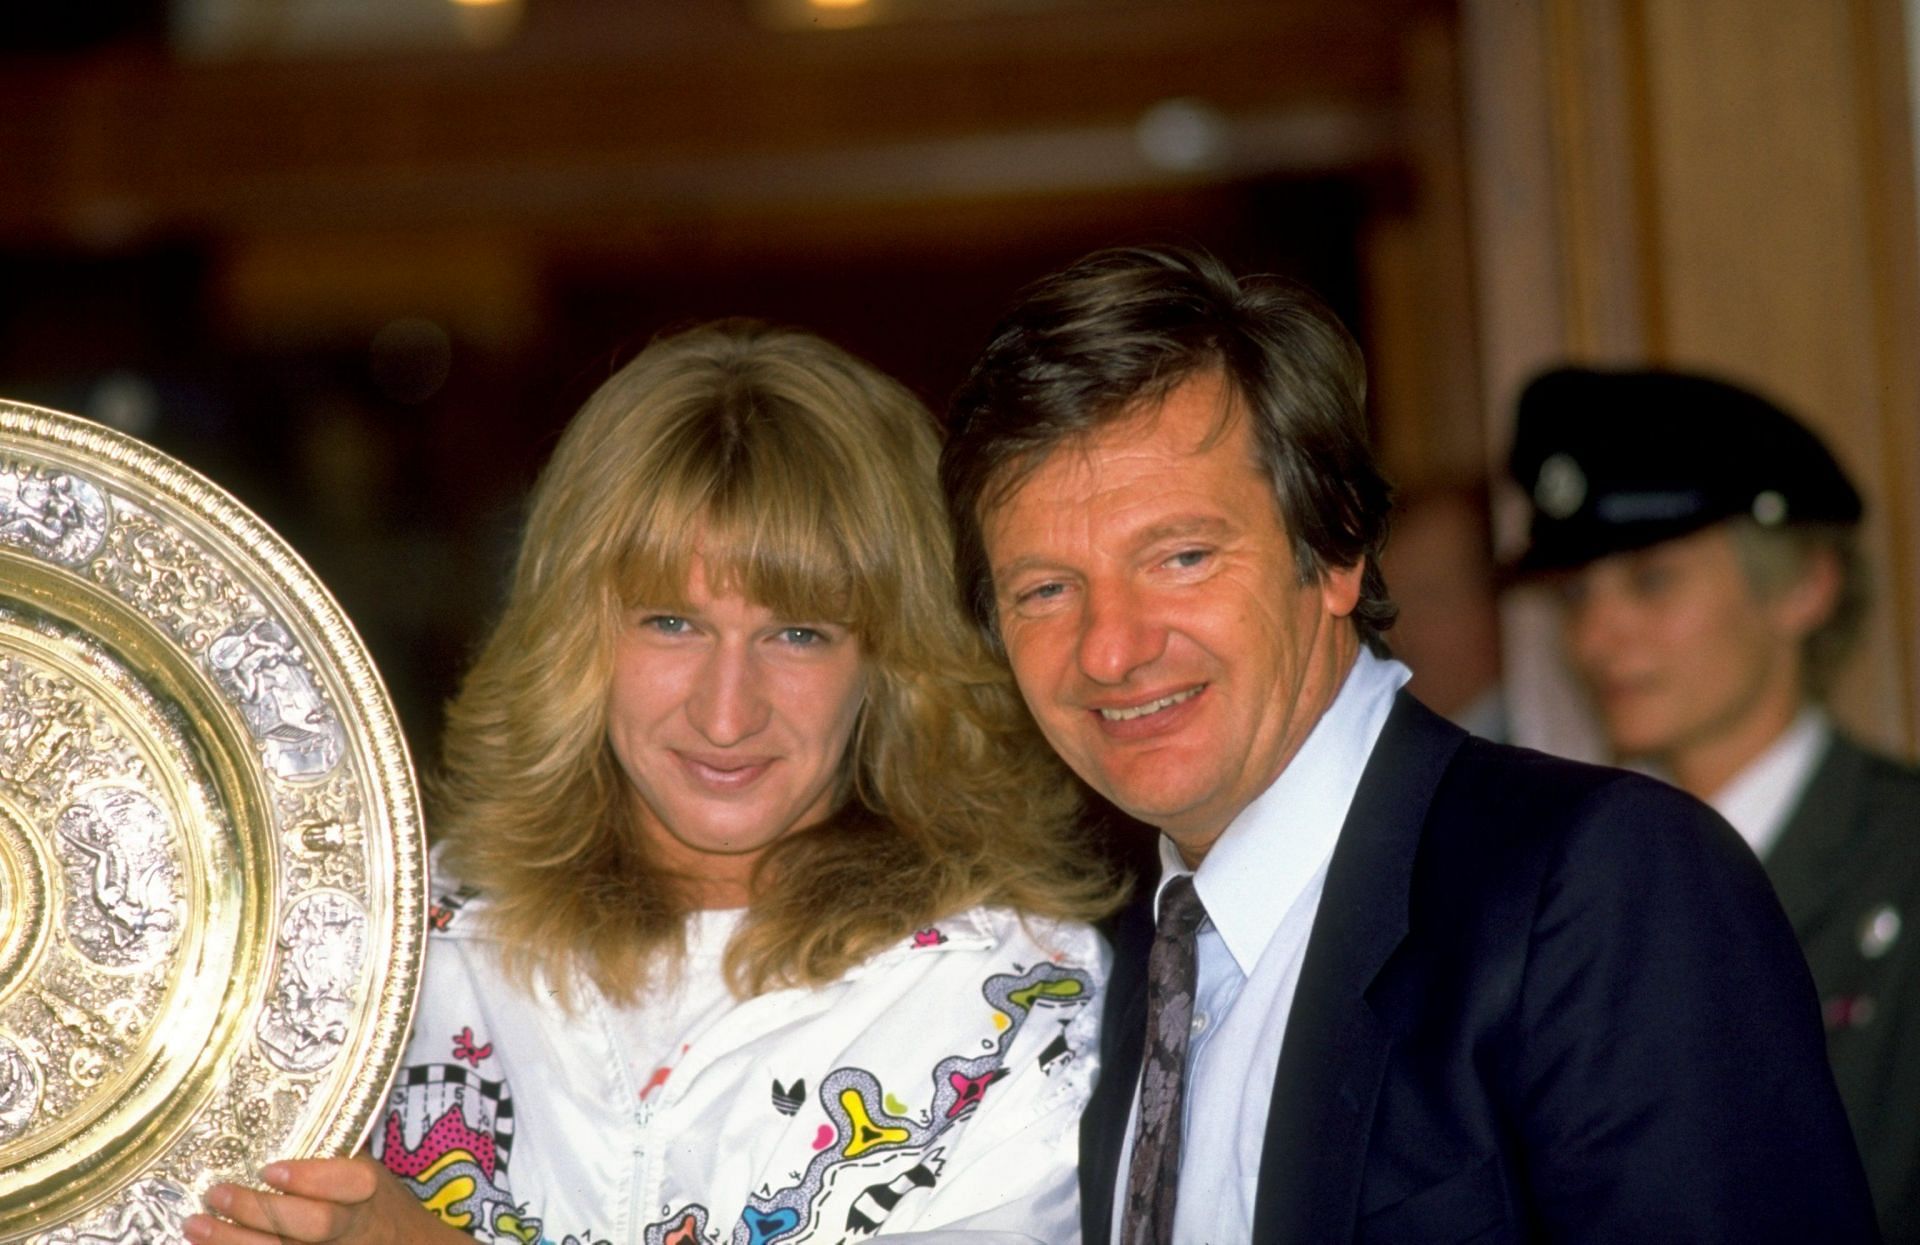 Steffi Graf pictured with her father Peter